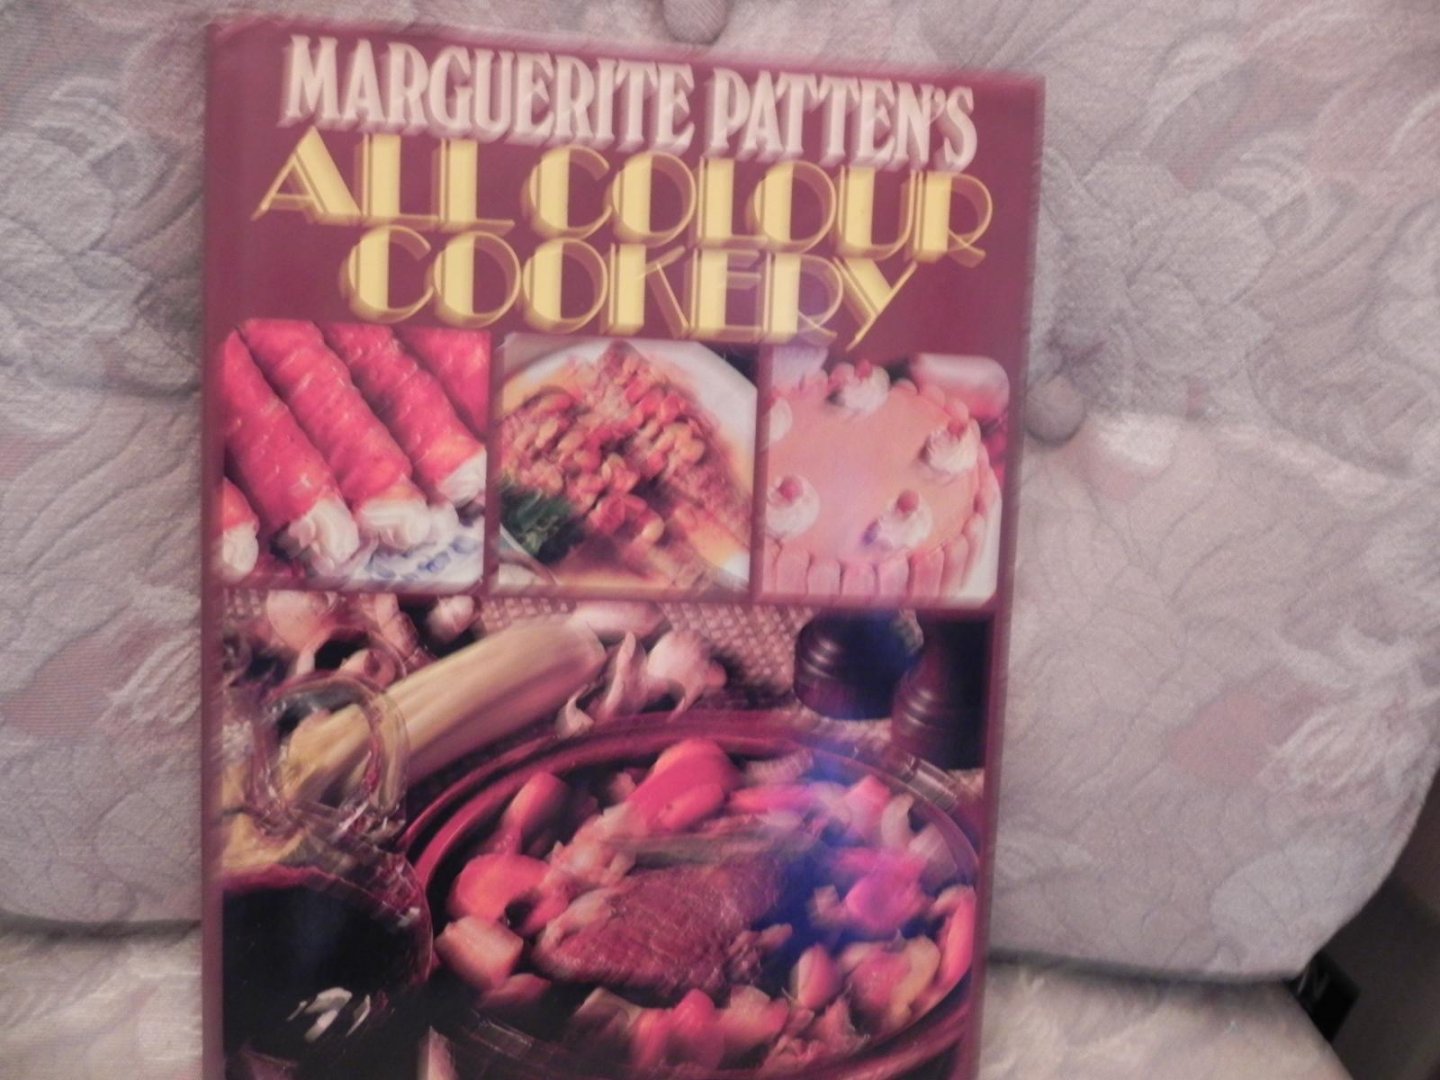 Marguerite Pattens - All Color Cookery